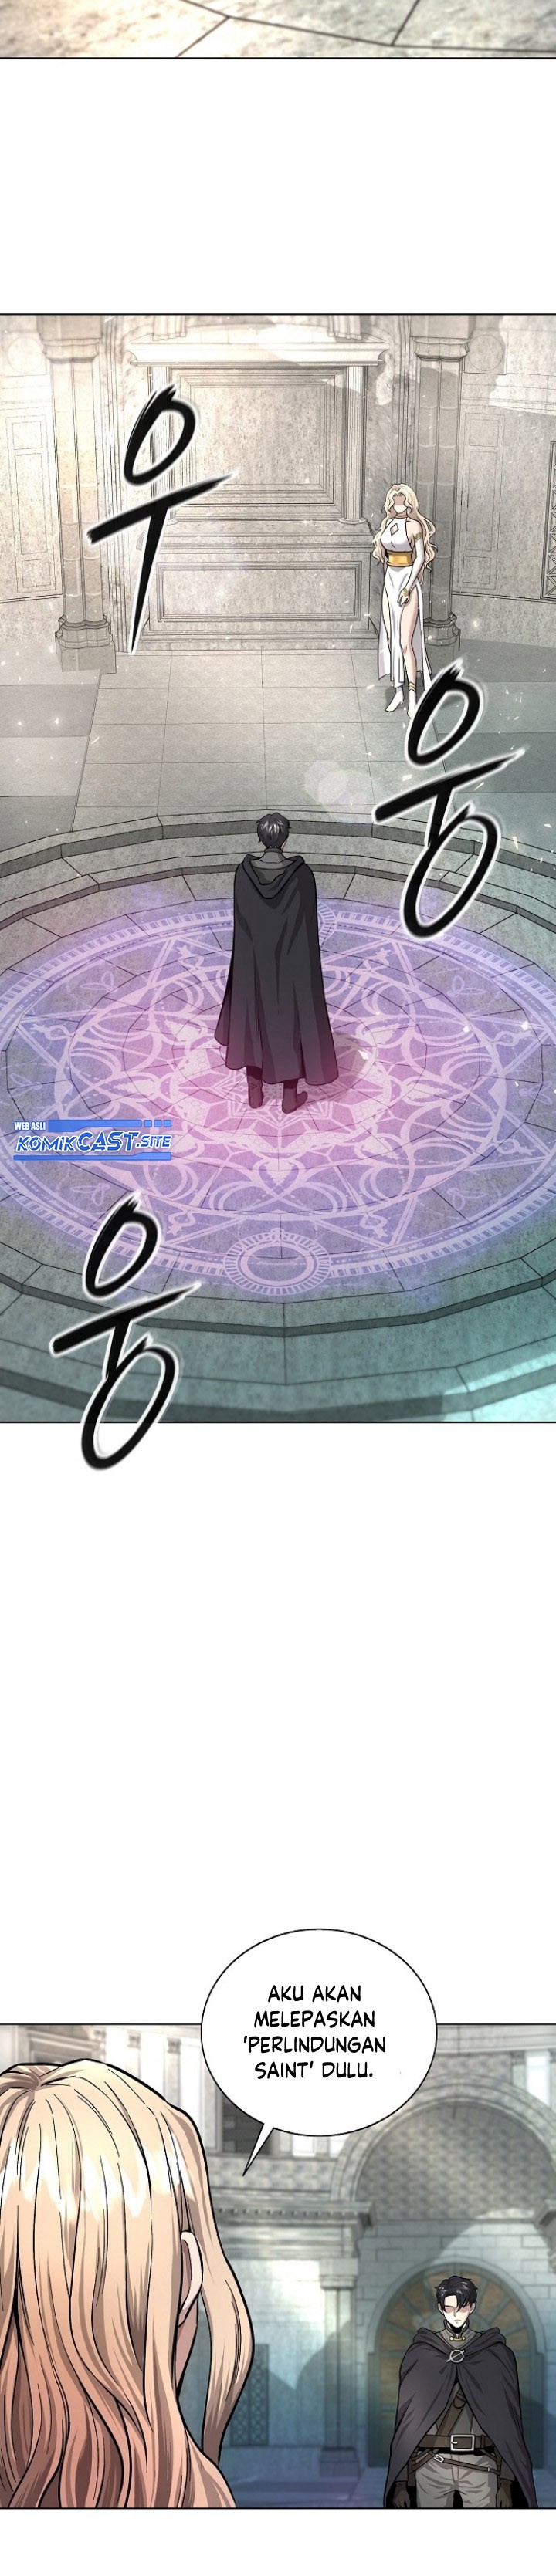 The Dark Mage s Return to enlistment Манга. The Dark Mage’s Return to enlistment.